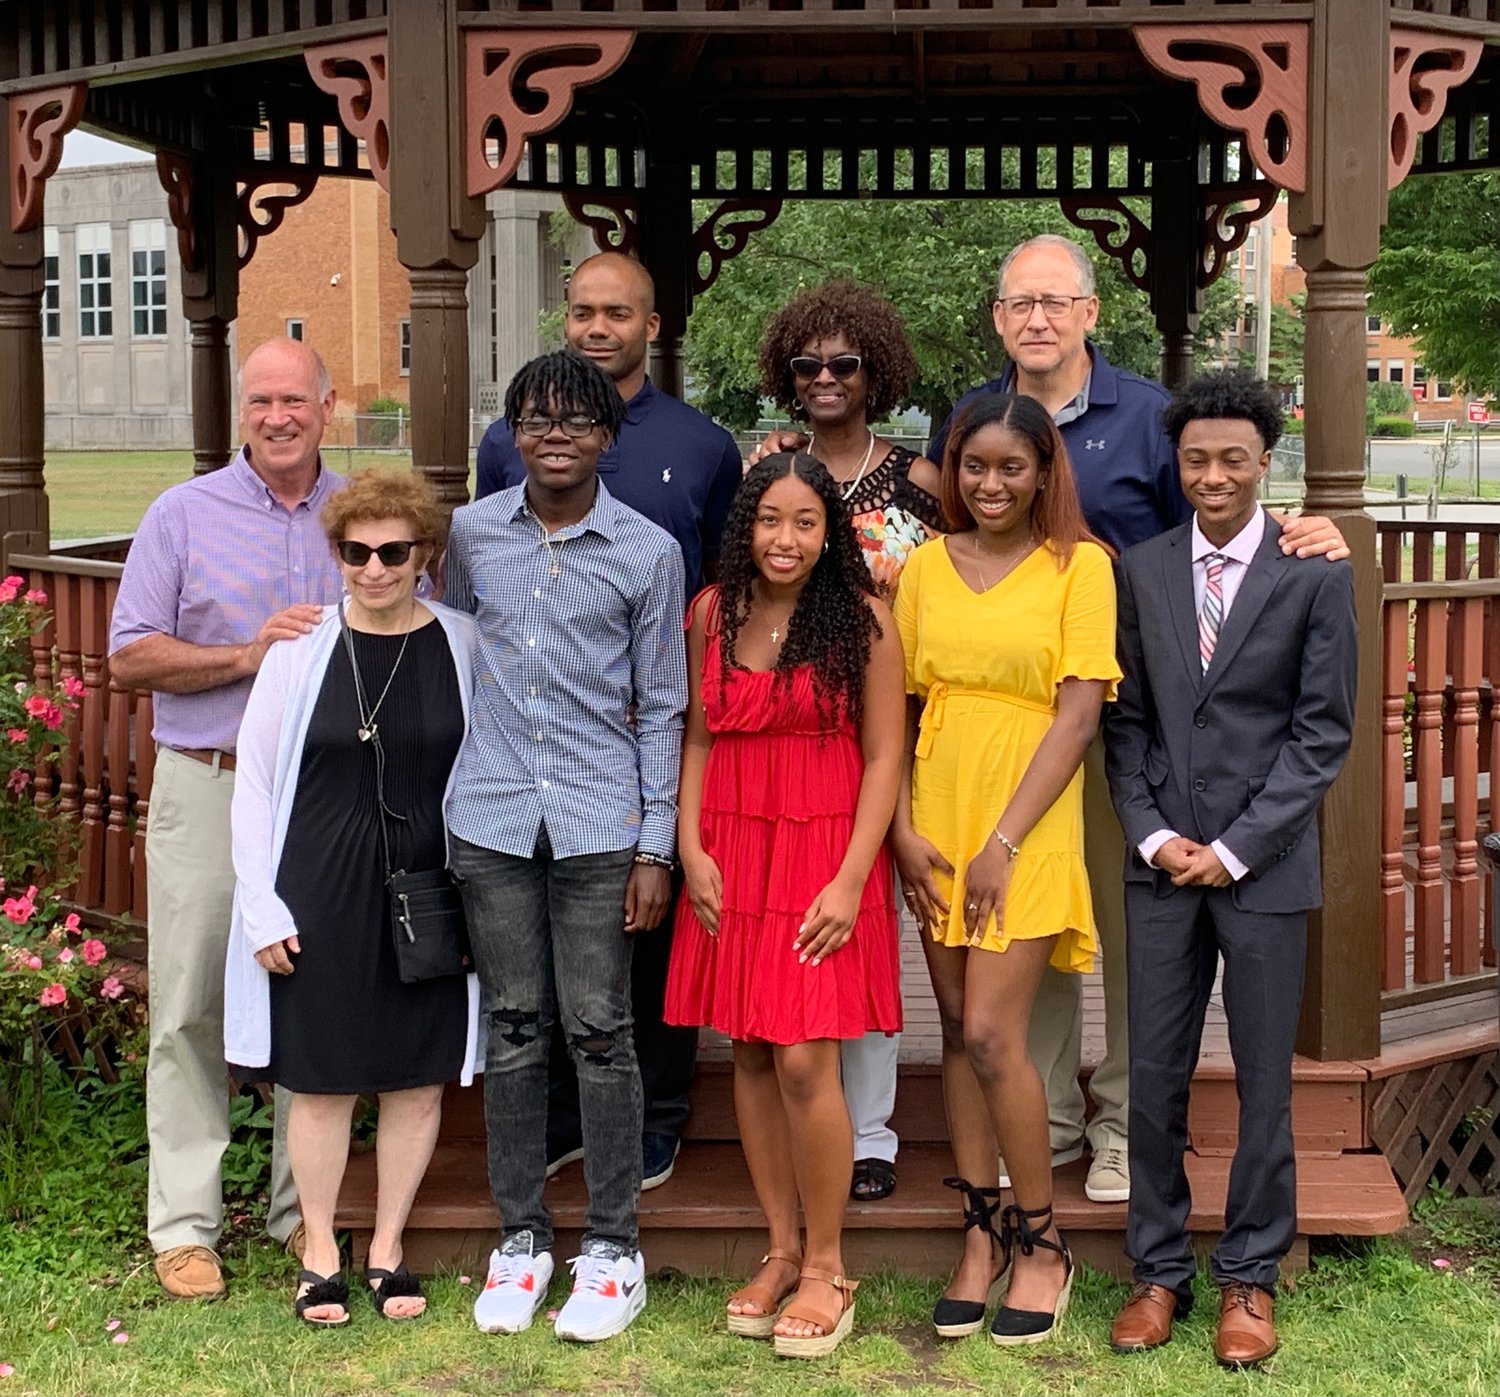 Richard Woods, top row, from left, Rob Blount, Michele Cadogan, Tom Capone; bottom row, Rhonda Eisenberg, Oceanside High School students Jared Pryce, Courtney Depperman and McKala-McKenzie McKay, and Baldwin High School student Jaylen Brunson celebrated at the Say Their Names Association’s inaugural scholarship awards ceremony.